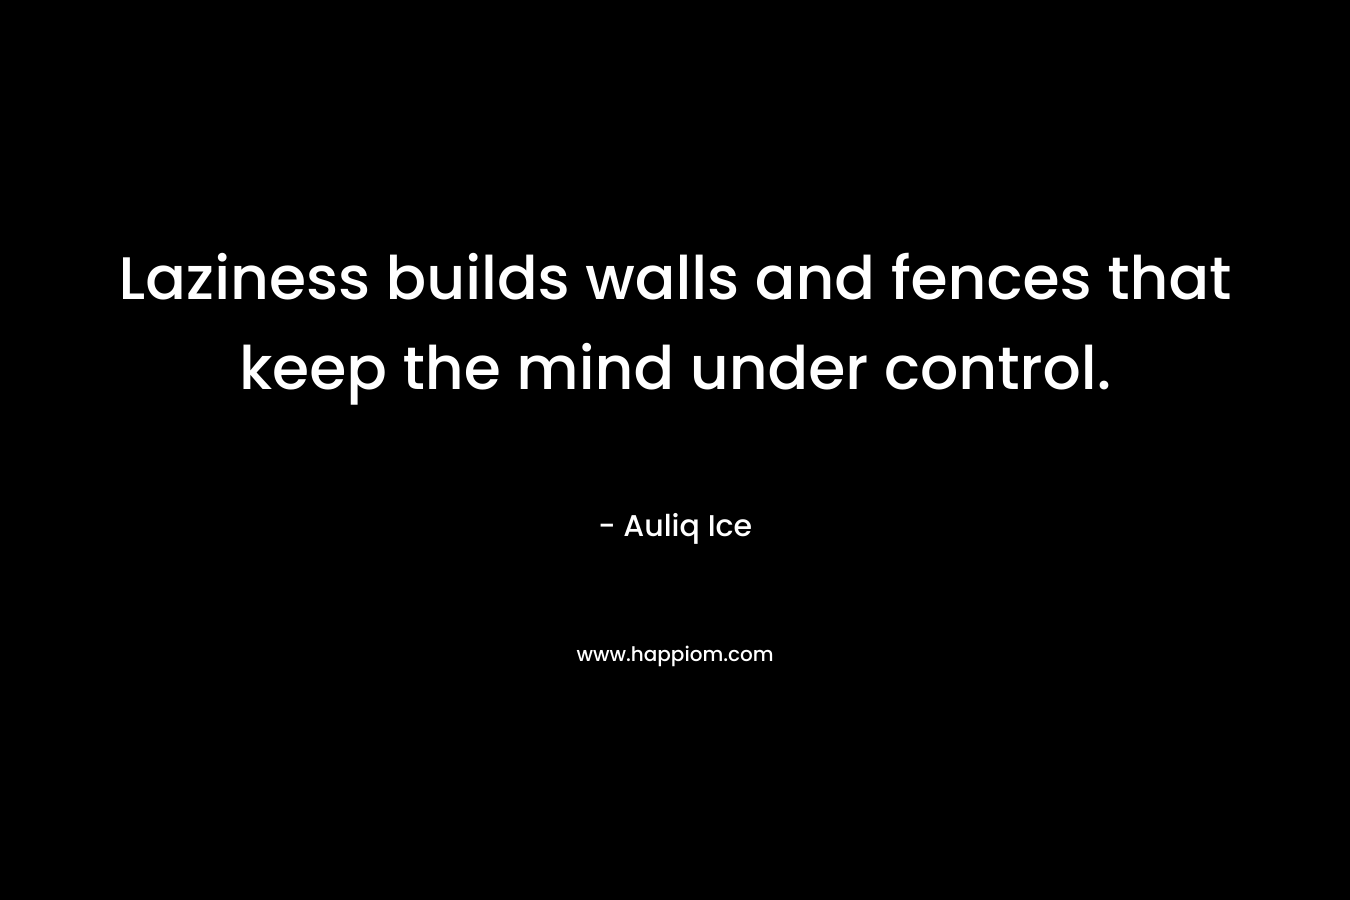 Laziness builds walls and fences that keep the mind under control.